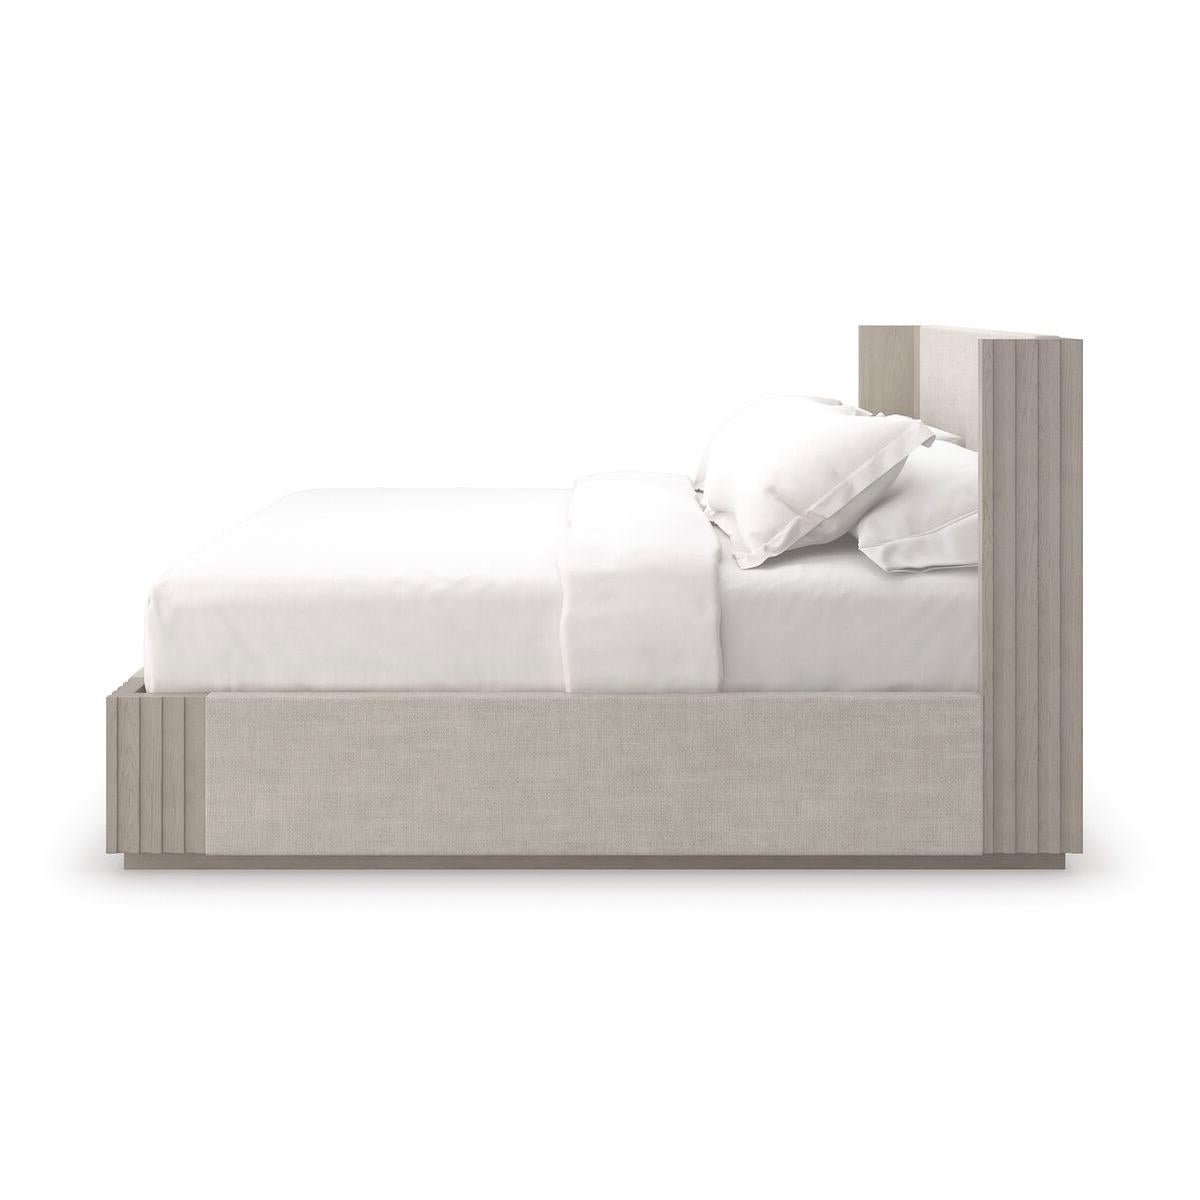 Contemporary Geometric Modern King Bed For Sale